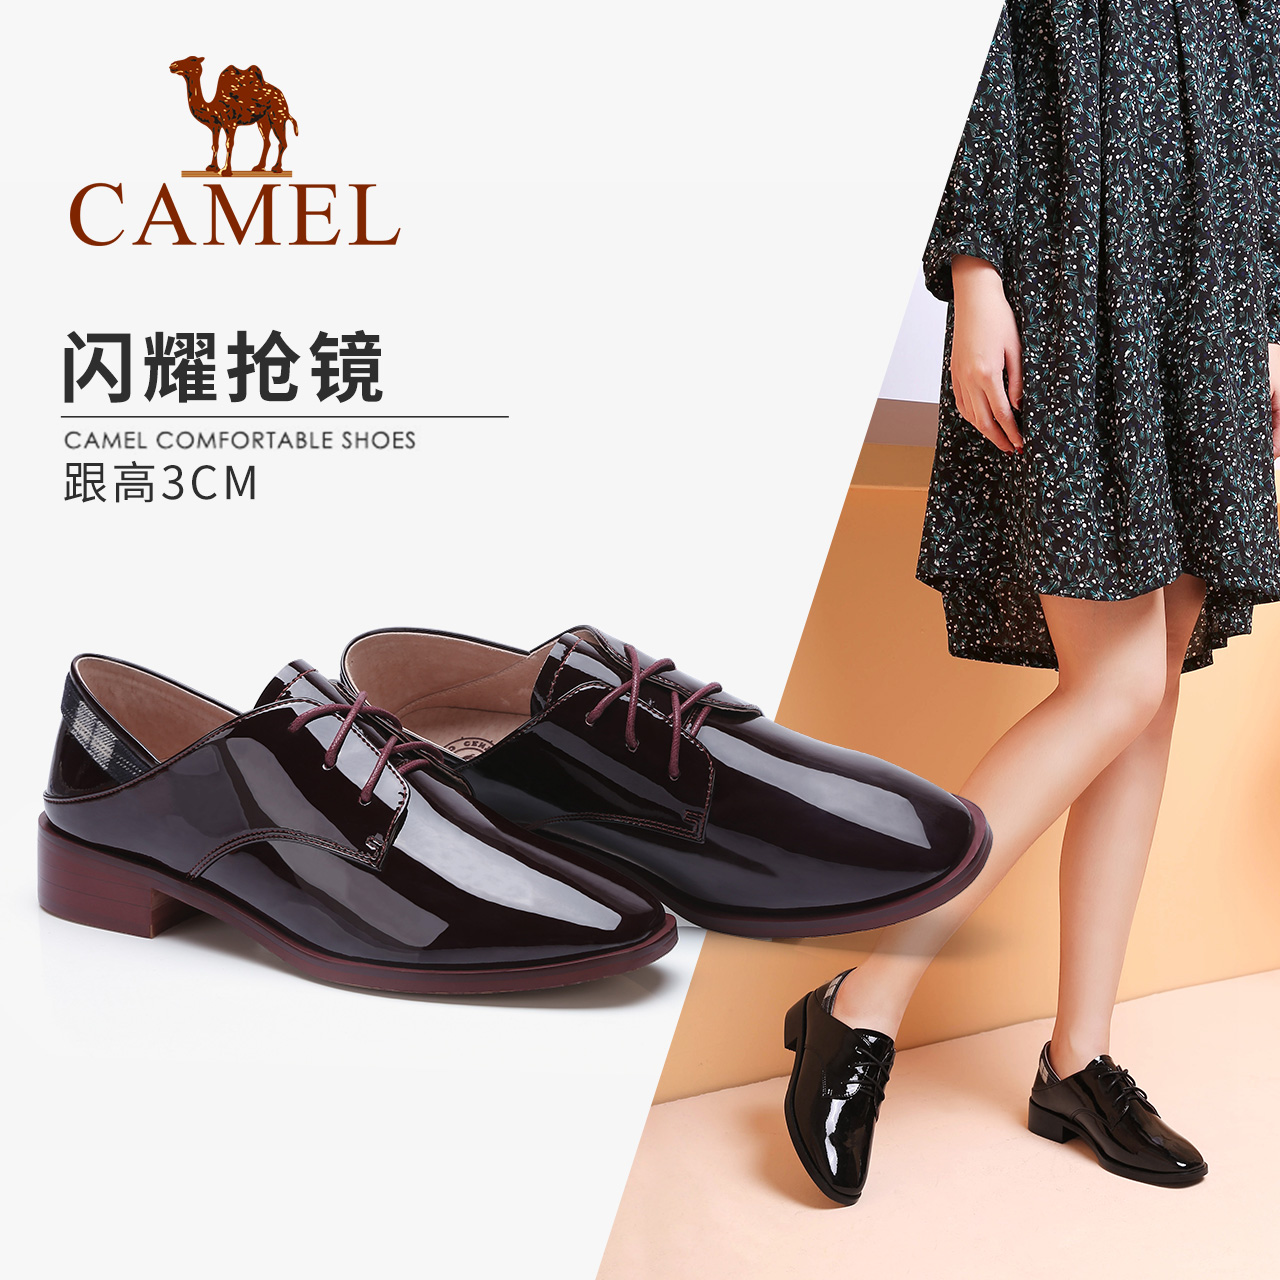 Camel's New Fashion Net Red Leisure Shoes British Square Head Low heel Lace Low heel Leather Shoes Single Shoe Women